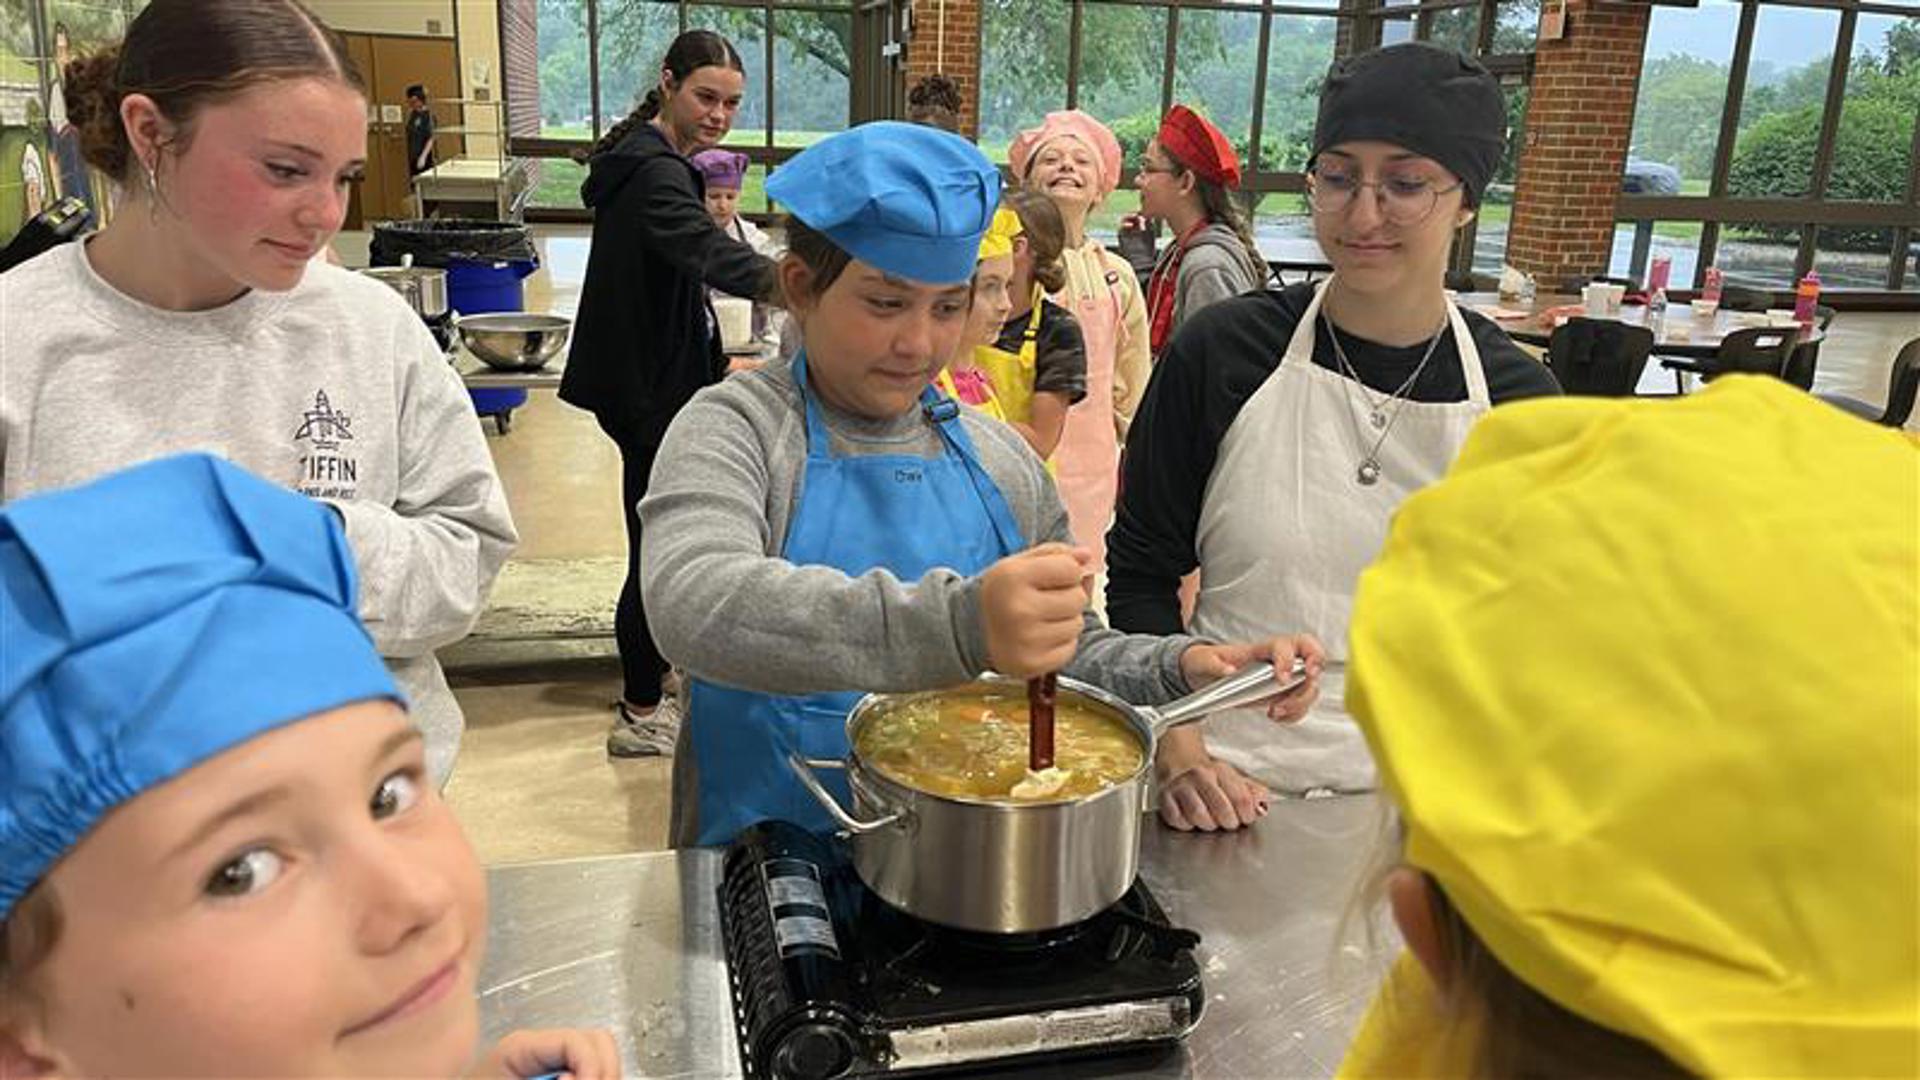 Dozens of 8 to 12-year-olds learn culinary skills from culinary students at the Vanguard Sentinel Career & Technology Centers.